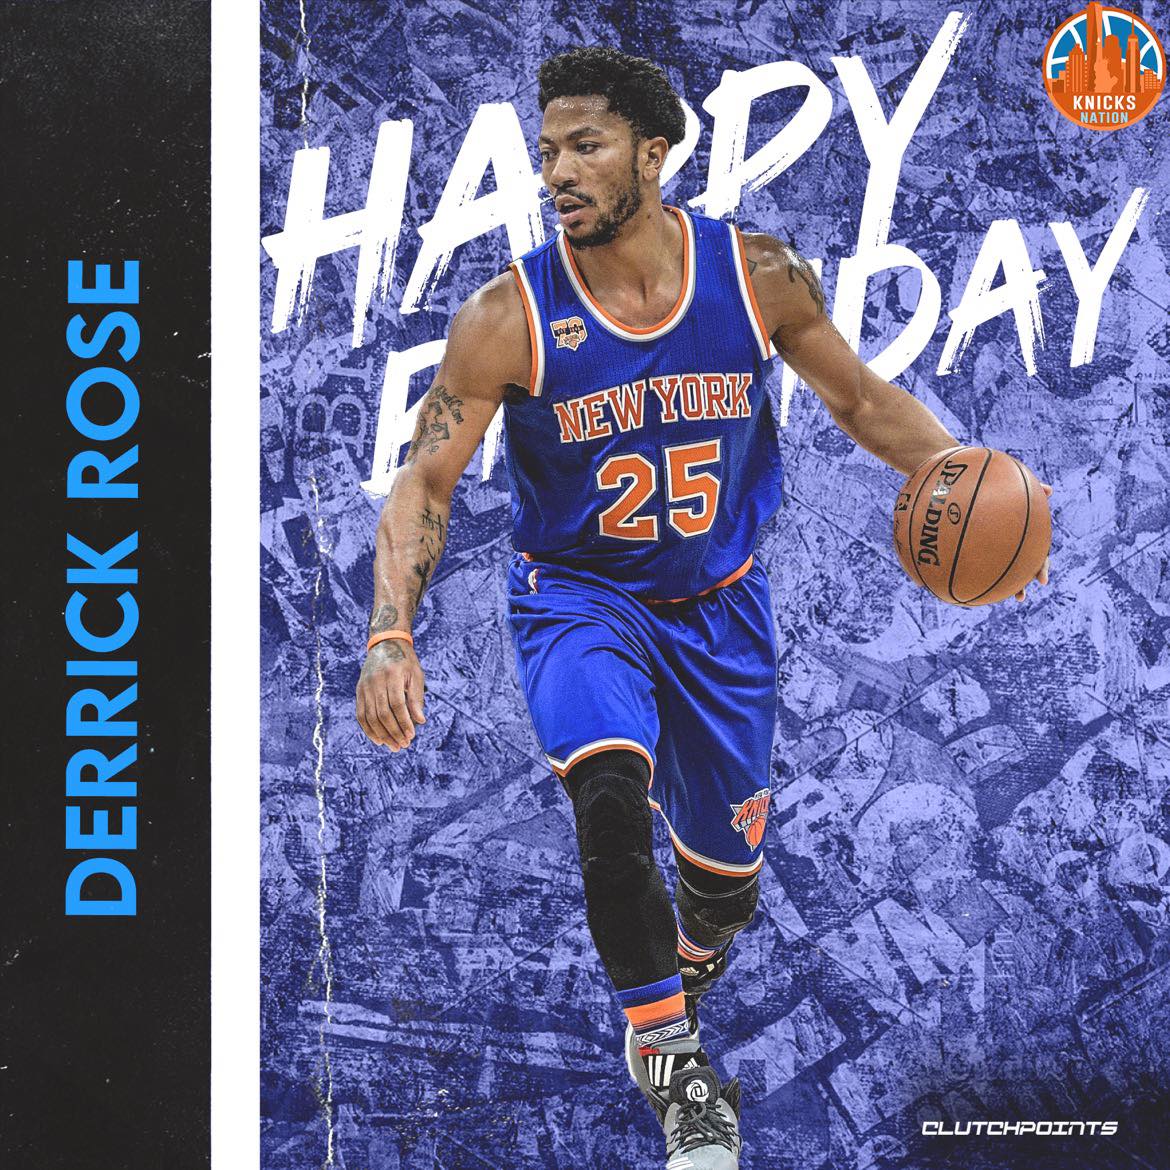 Knicks Nation, join us in wishing Derrick Rose a happy 33rd birthday! 